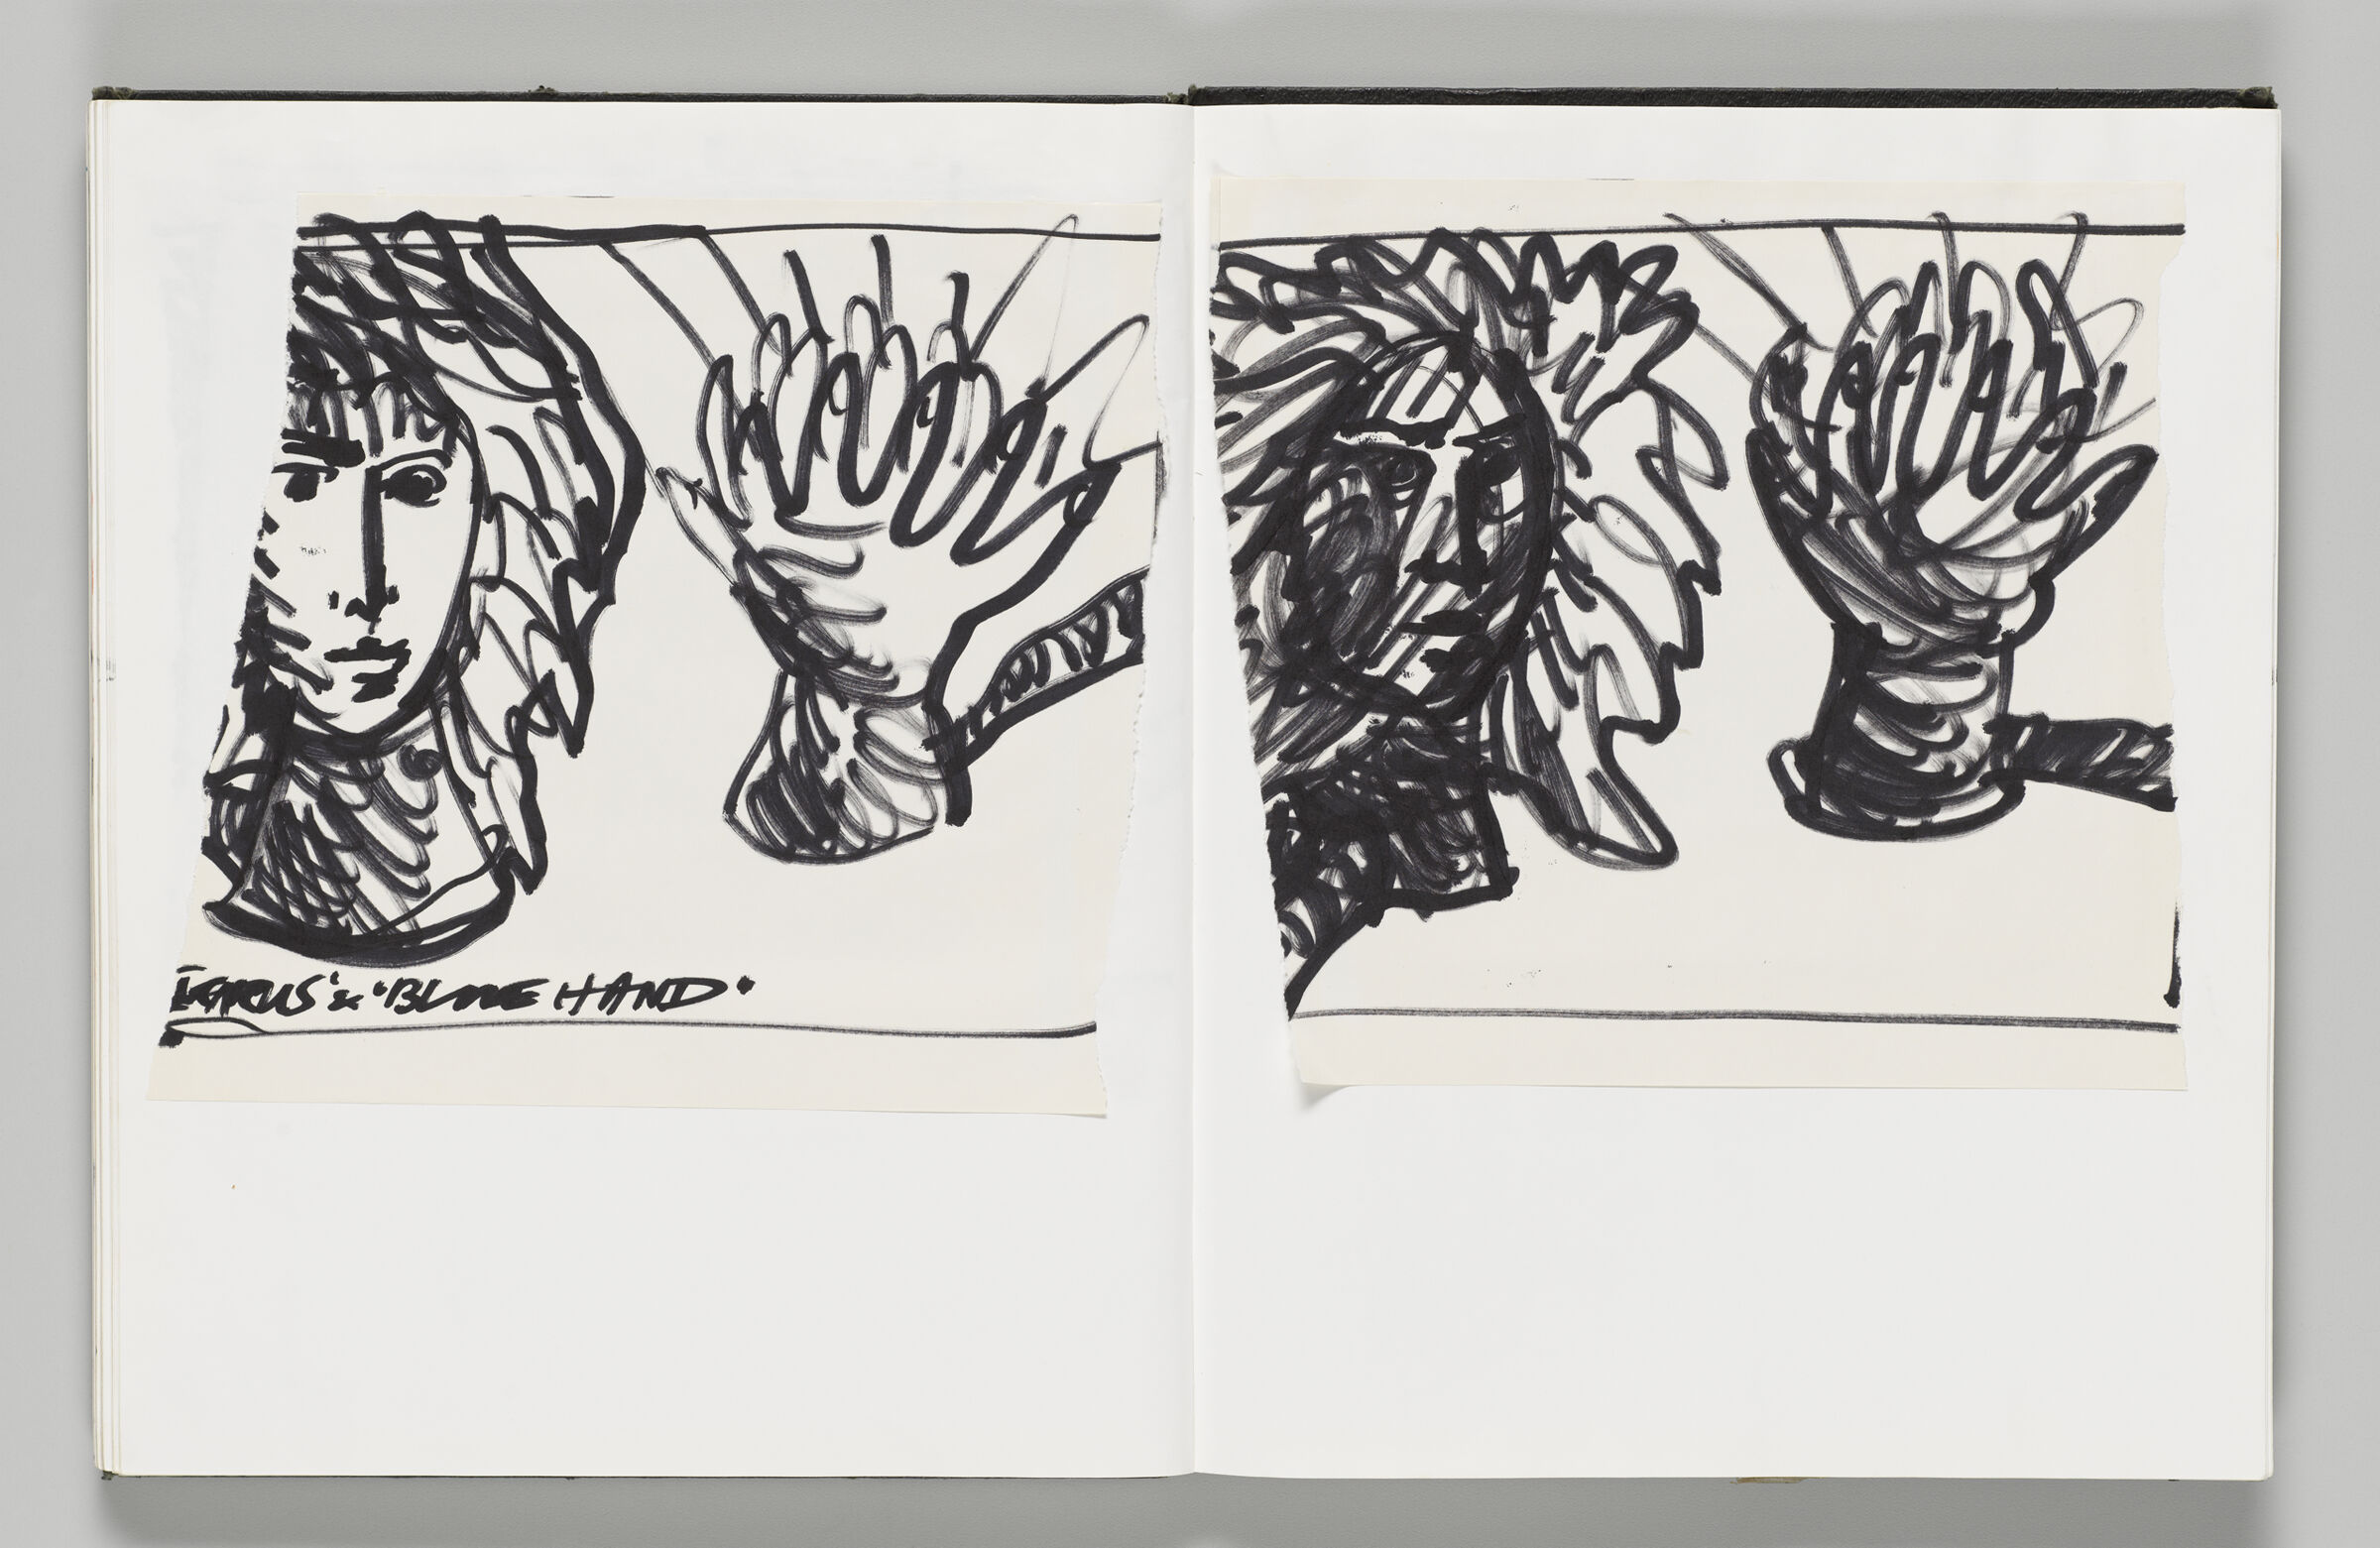 Untitled (Adhered Icarus And Blue Hand Sketch, Left Page); Untitled (Adhered Icarus And Blue Hand Sketch, Right Page)